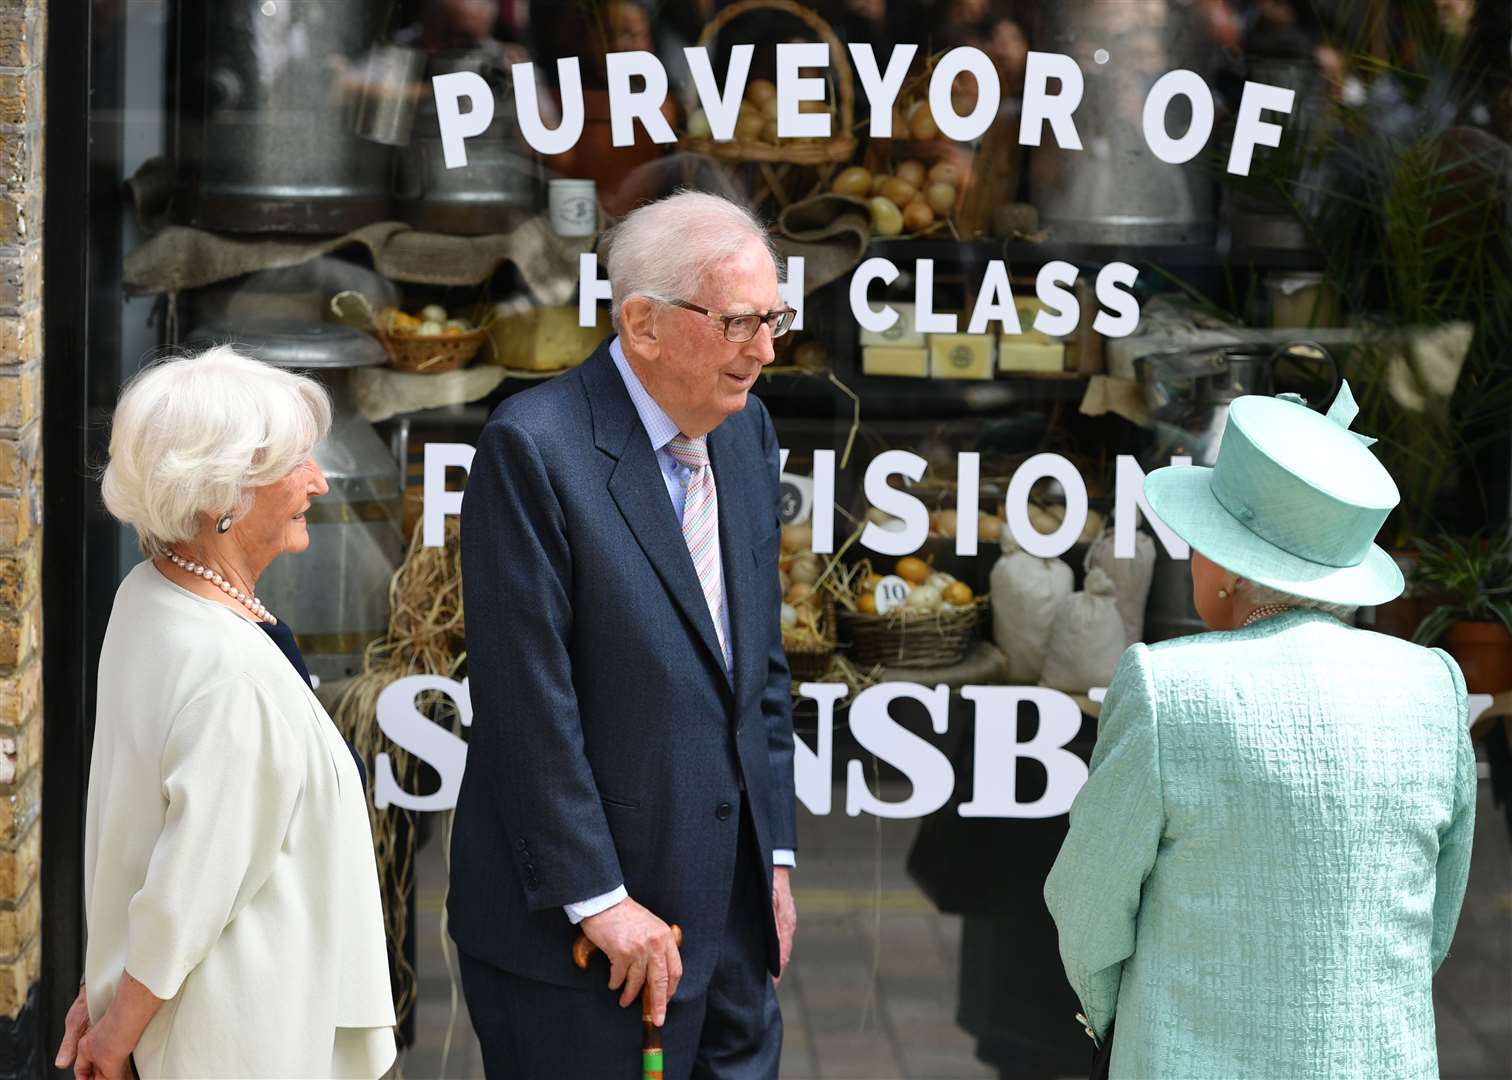 Queen Elizabeth II talks to Lord Sainsbury and his wife outside a replica of one of the original Sainsbury’s stores at Covent Garden, London (Dominic Lipinski/PA Archive)